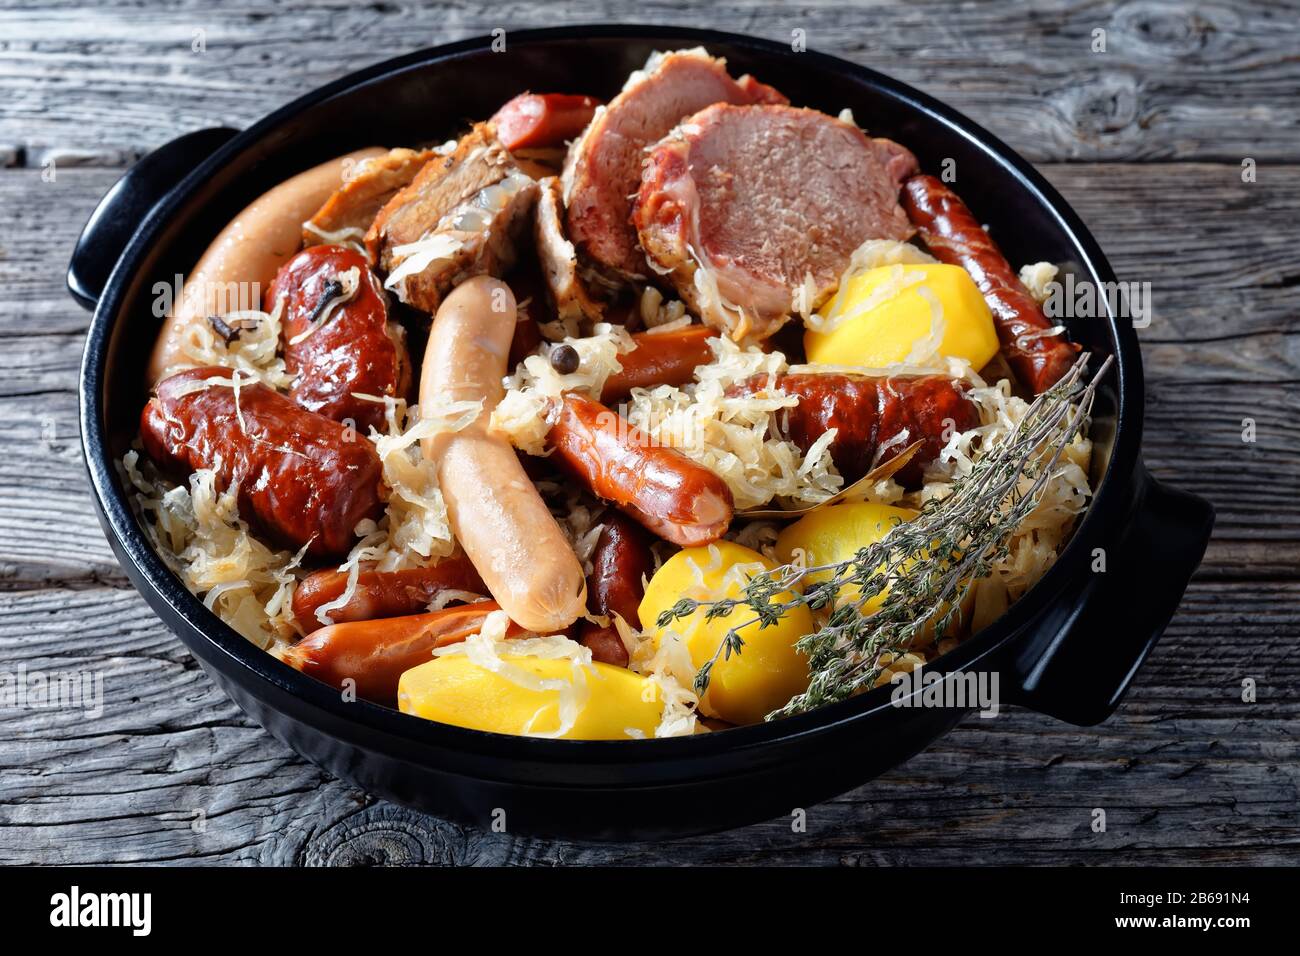 Alsace dish: sour cabbage stew with meat: pork loin and bacon and sausages and potato cooked in white wine thyme, juniper berries, garlic served on a Stock Photo